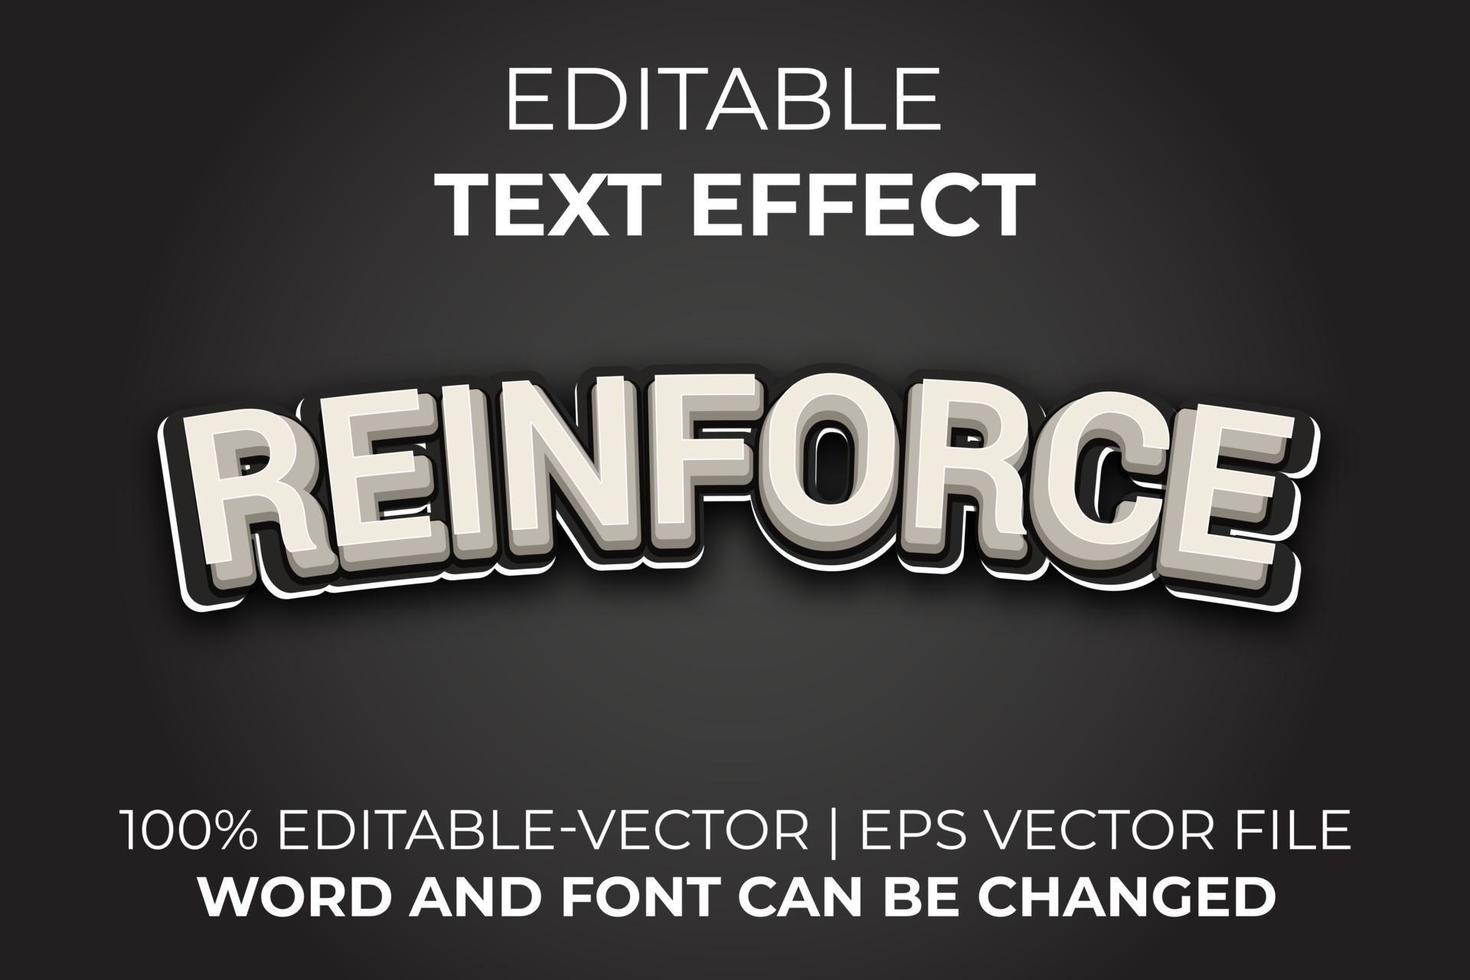 Reinforce text effect, easy to edit vector